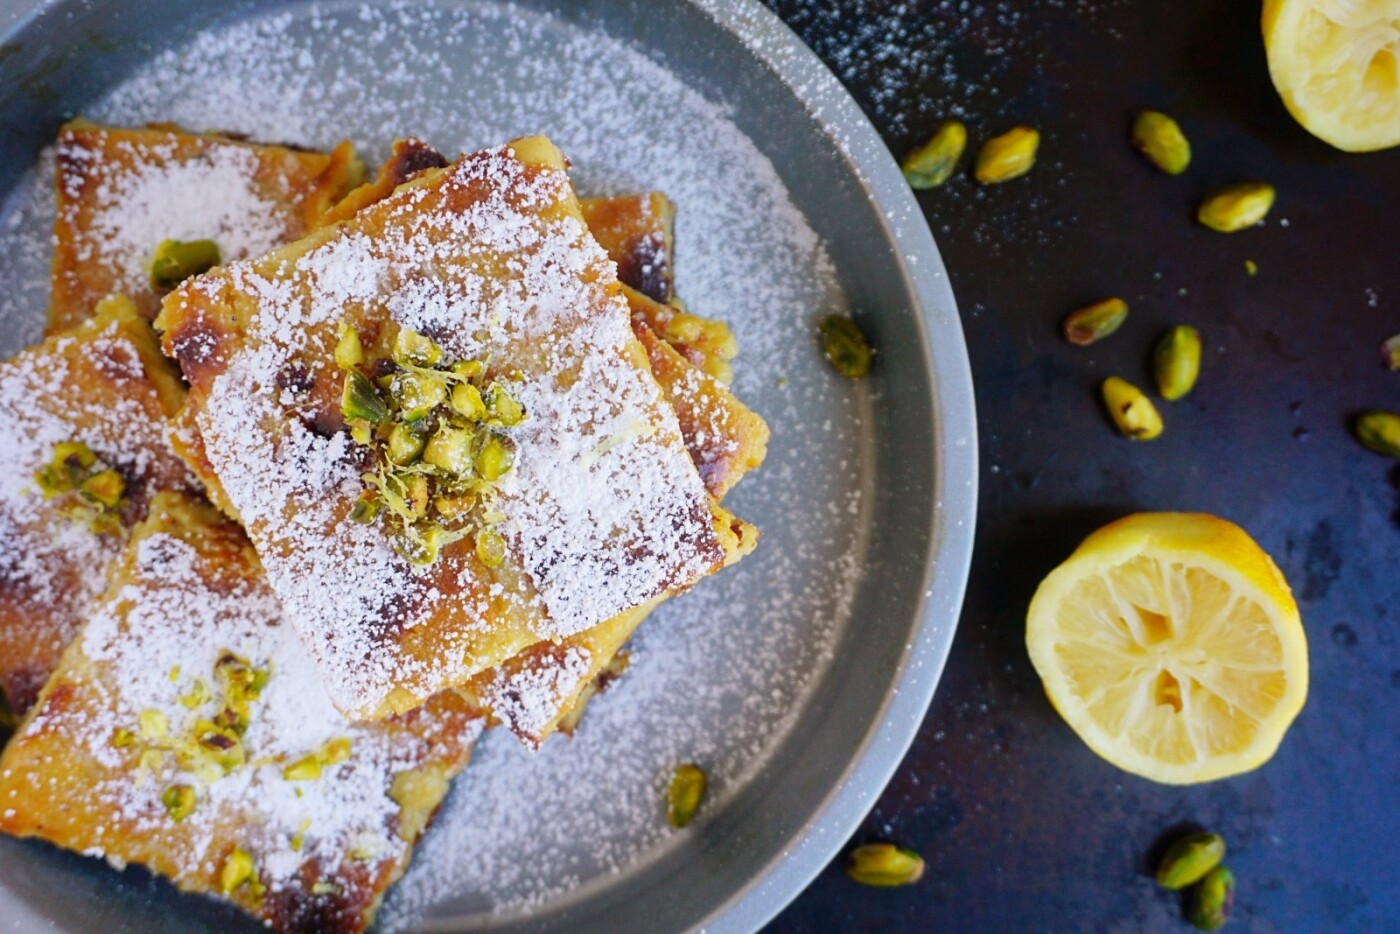 "Galatopita"  a traditional Greek dessert. This milk custard pie is silky,citrusy  with the beautiful addition of pistachios. A gluten free twist on a family recipe.